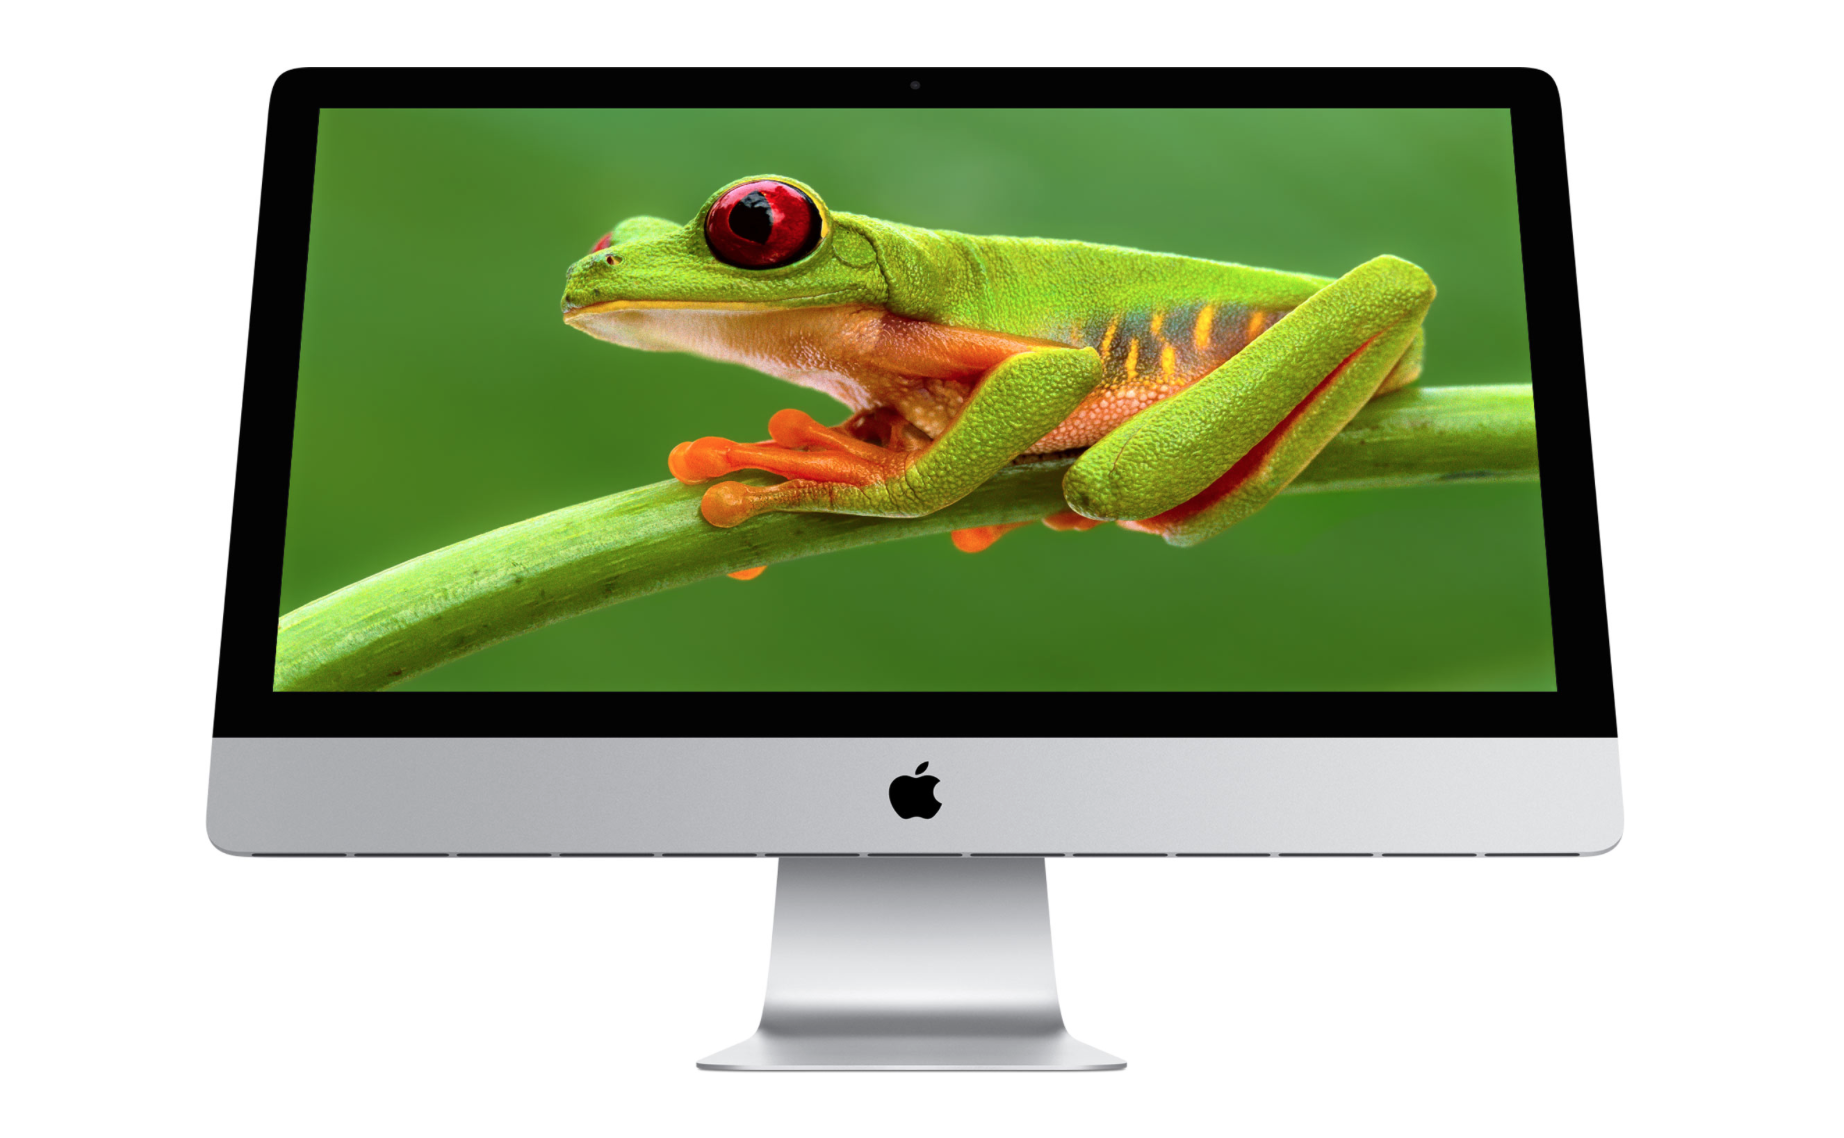 Apple launches new Retina 4K 21.5-inch iMac, all 27-inch iMacs now